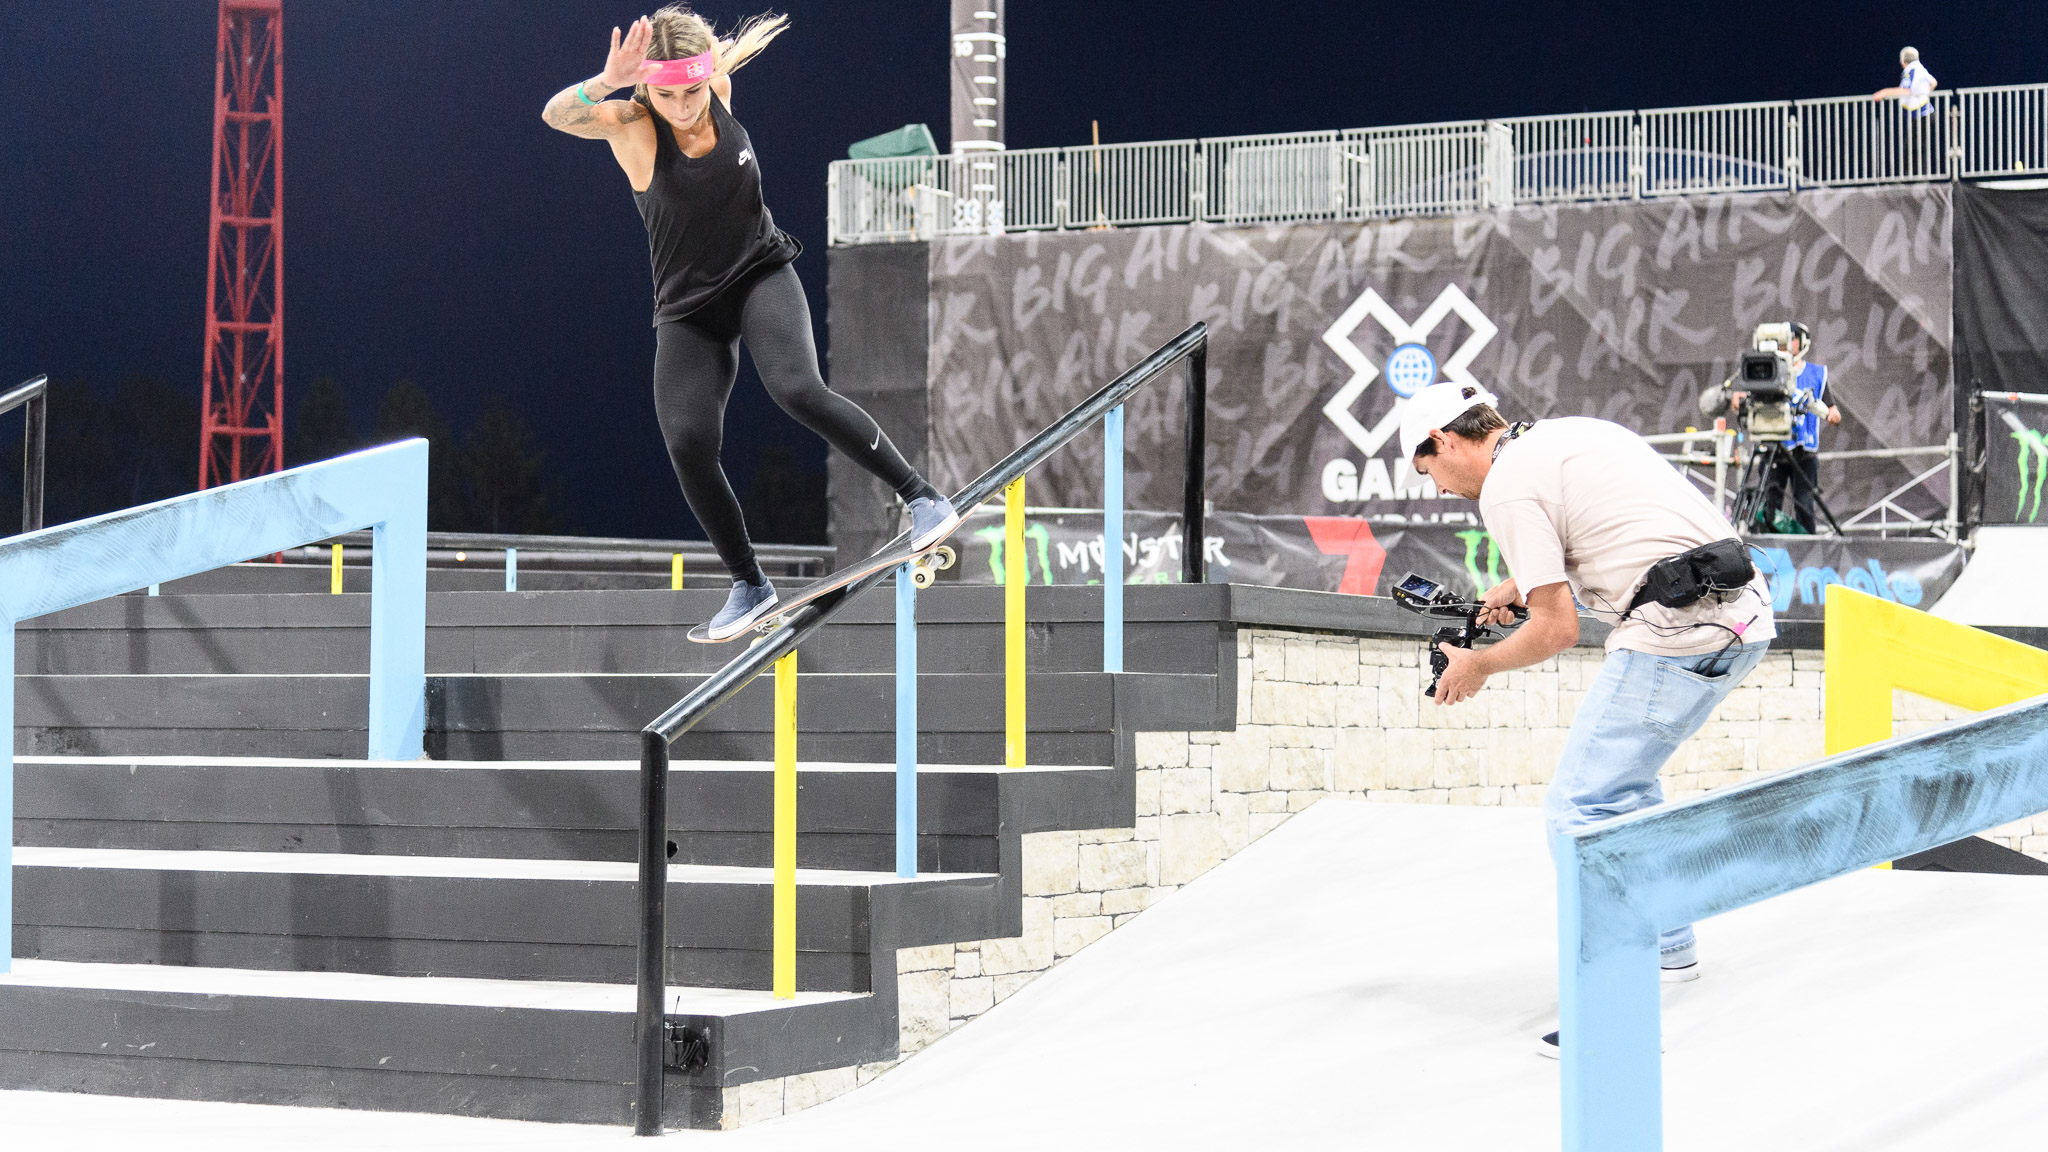 X Games Shanghai 2019: Athletes to watch